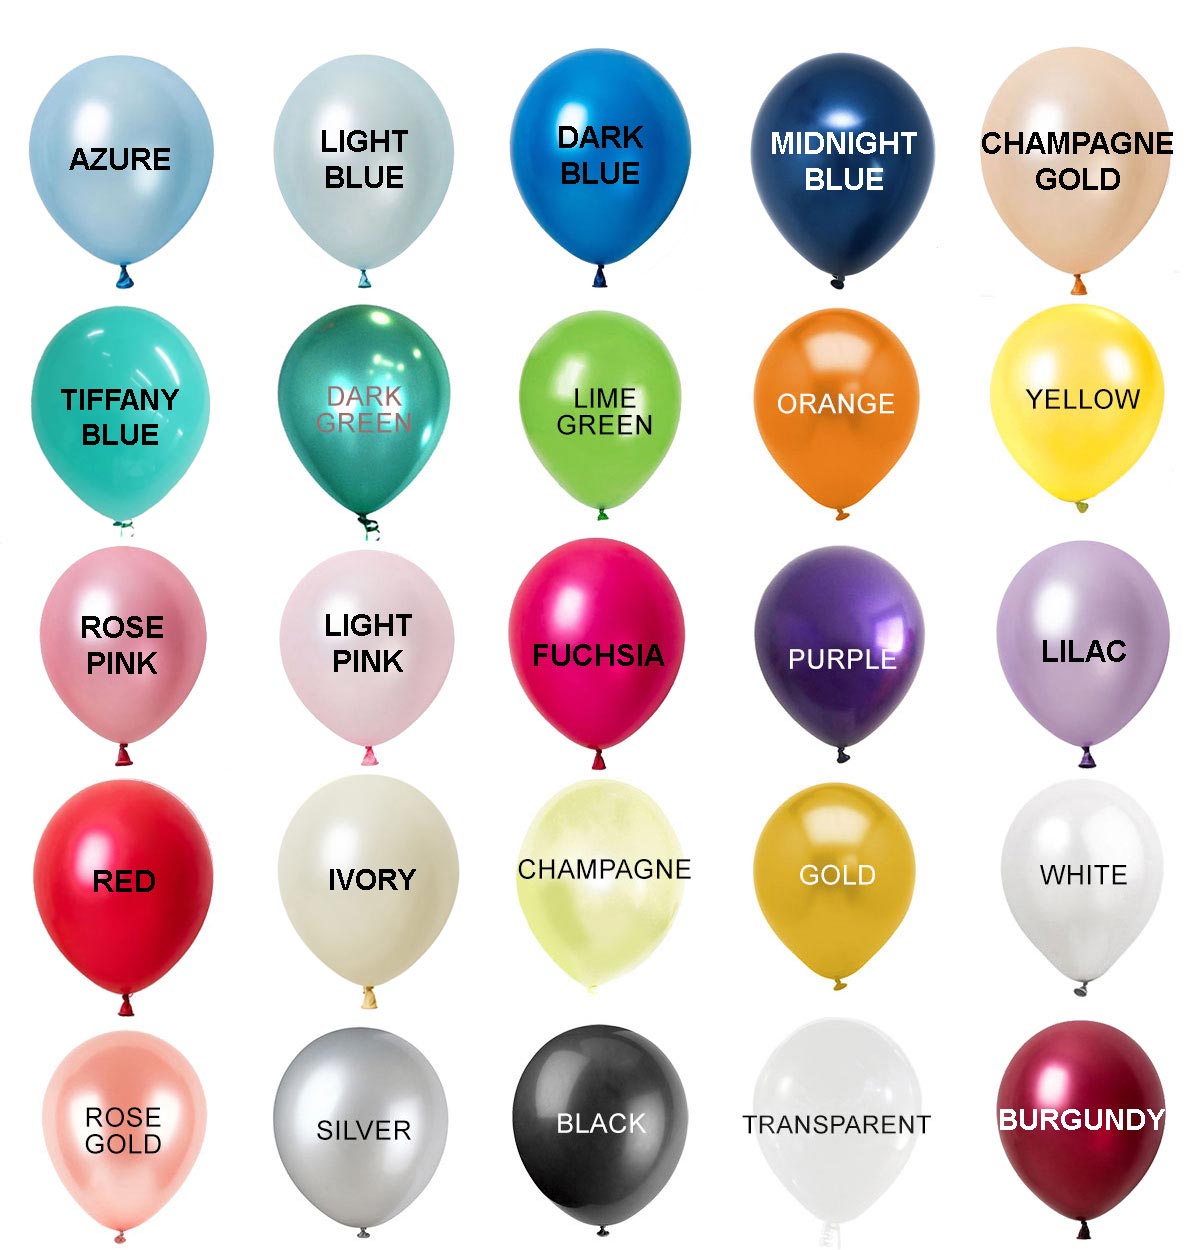 Choose the colour of the balloons for your balloon display.